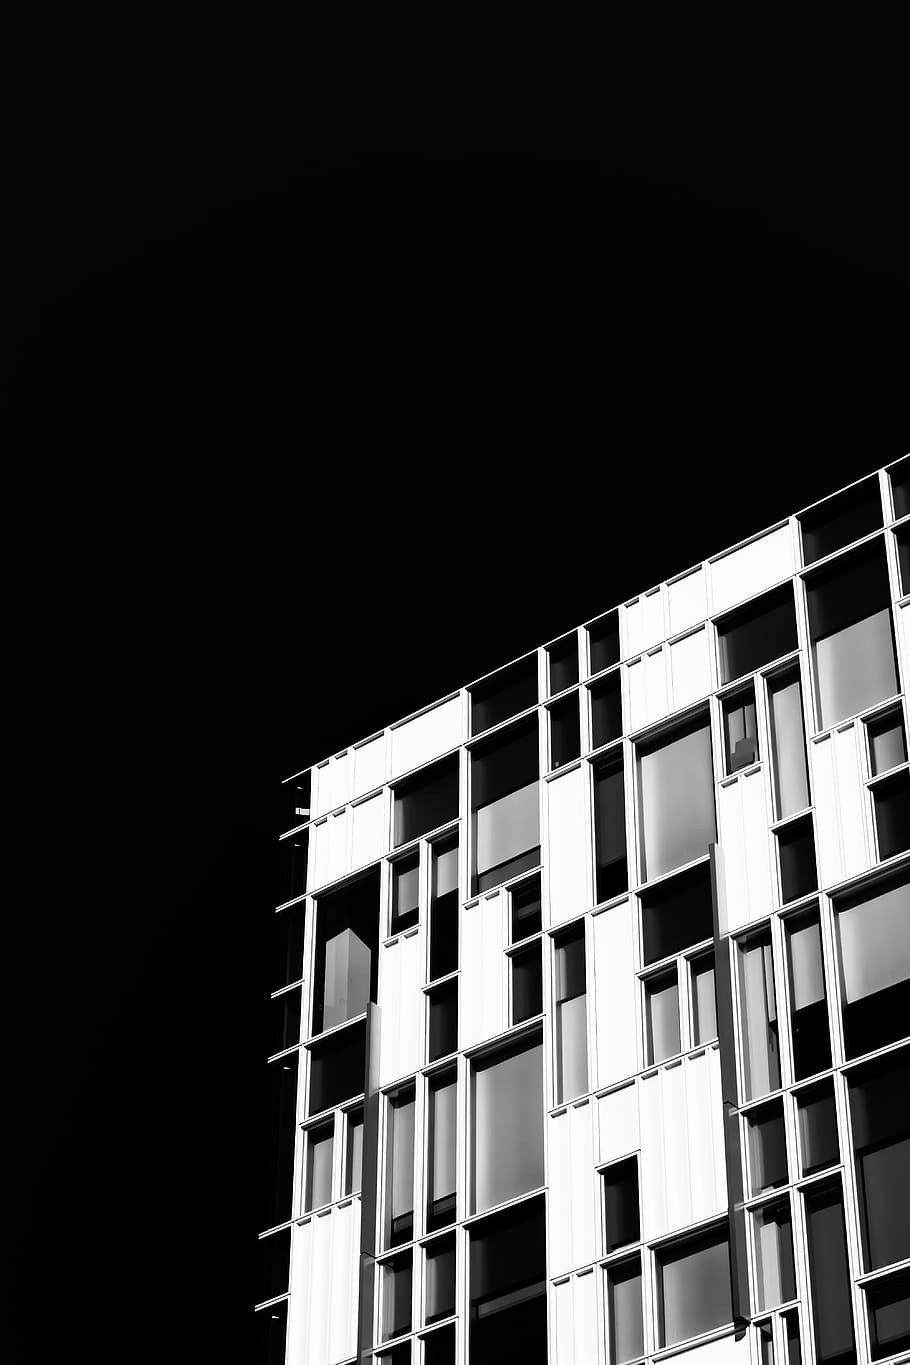 architectural, photography, gray, mirror building, architecture, building, infrastructure, black, white, black and white